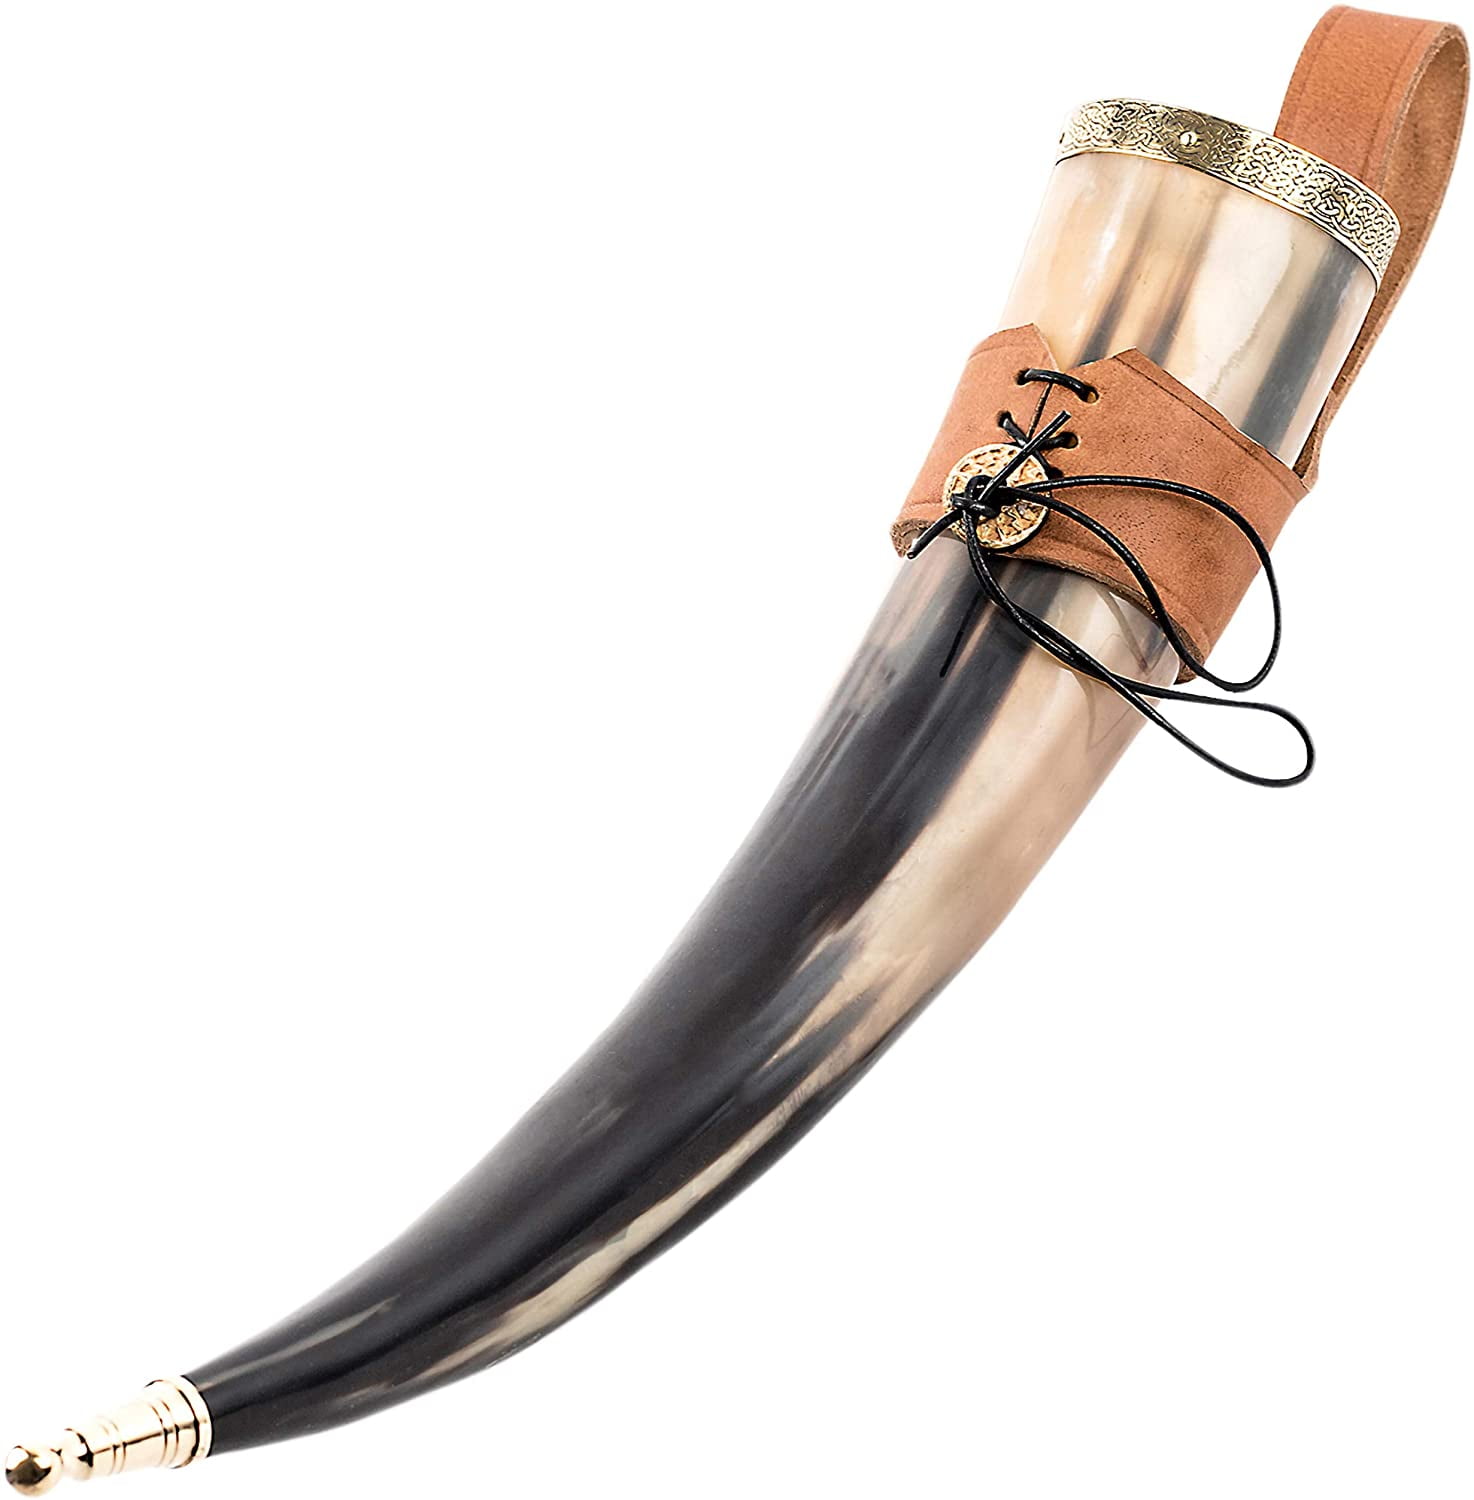 Viking Wine/Mead Mug Drinking Horn with Brass Fitting Brown Leather Holder